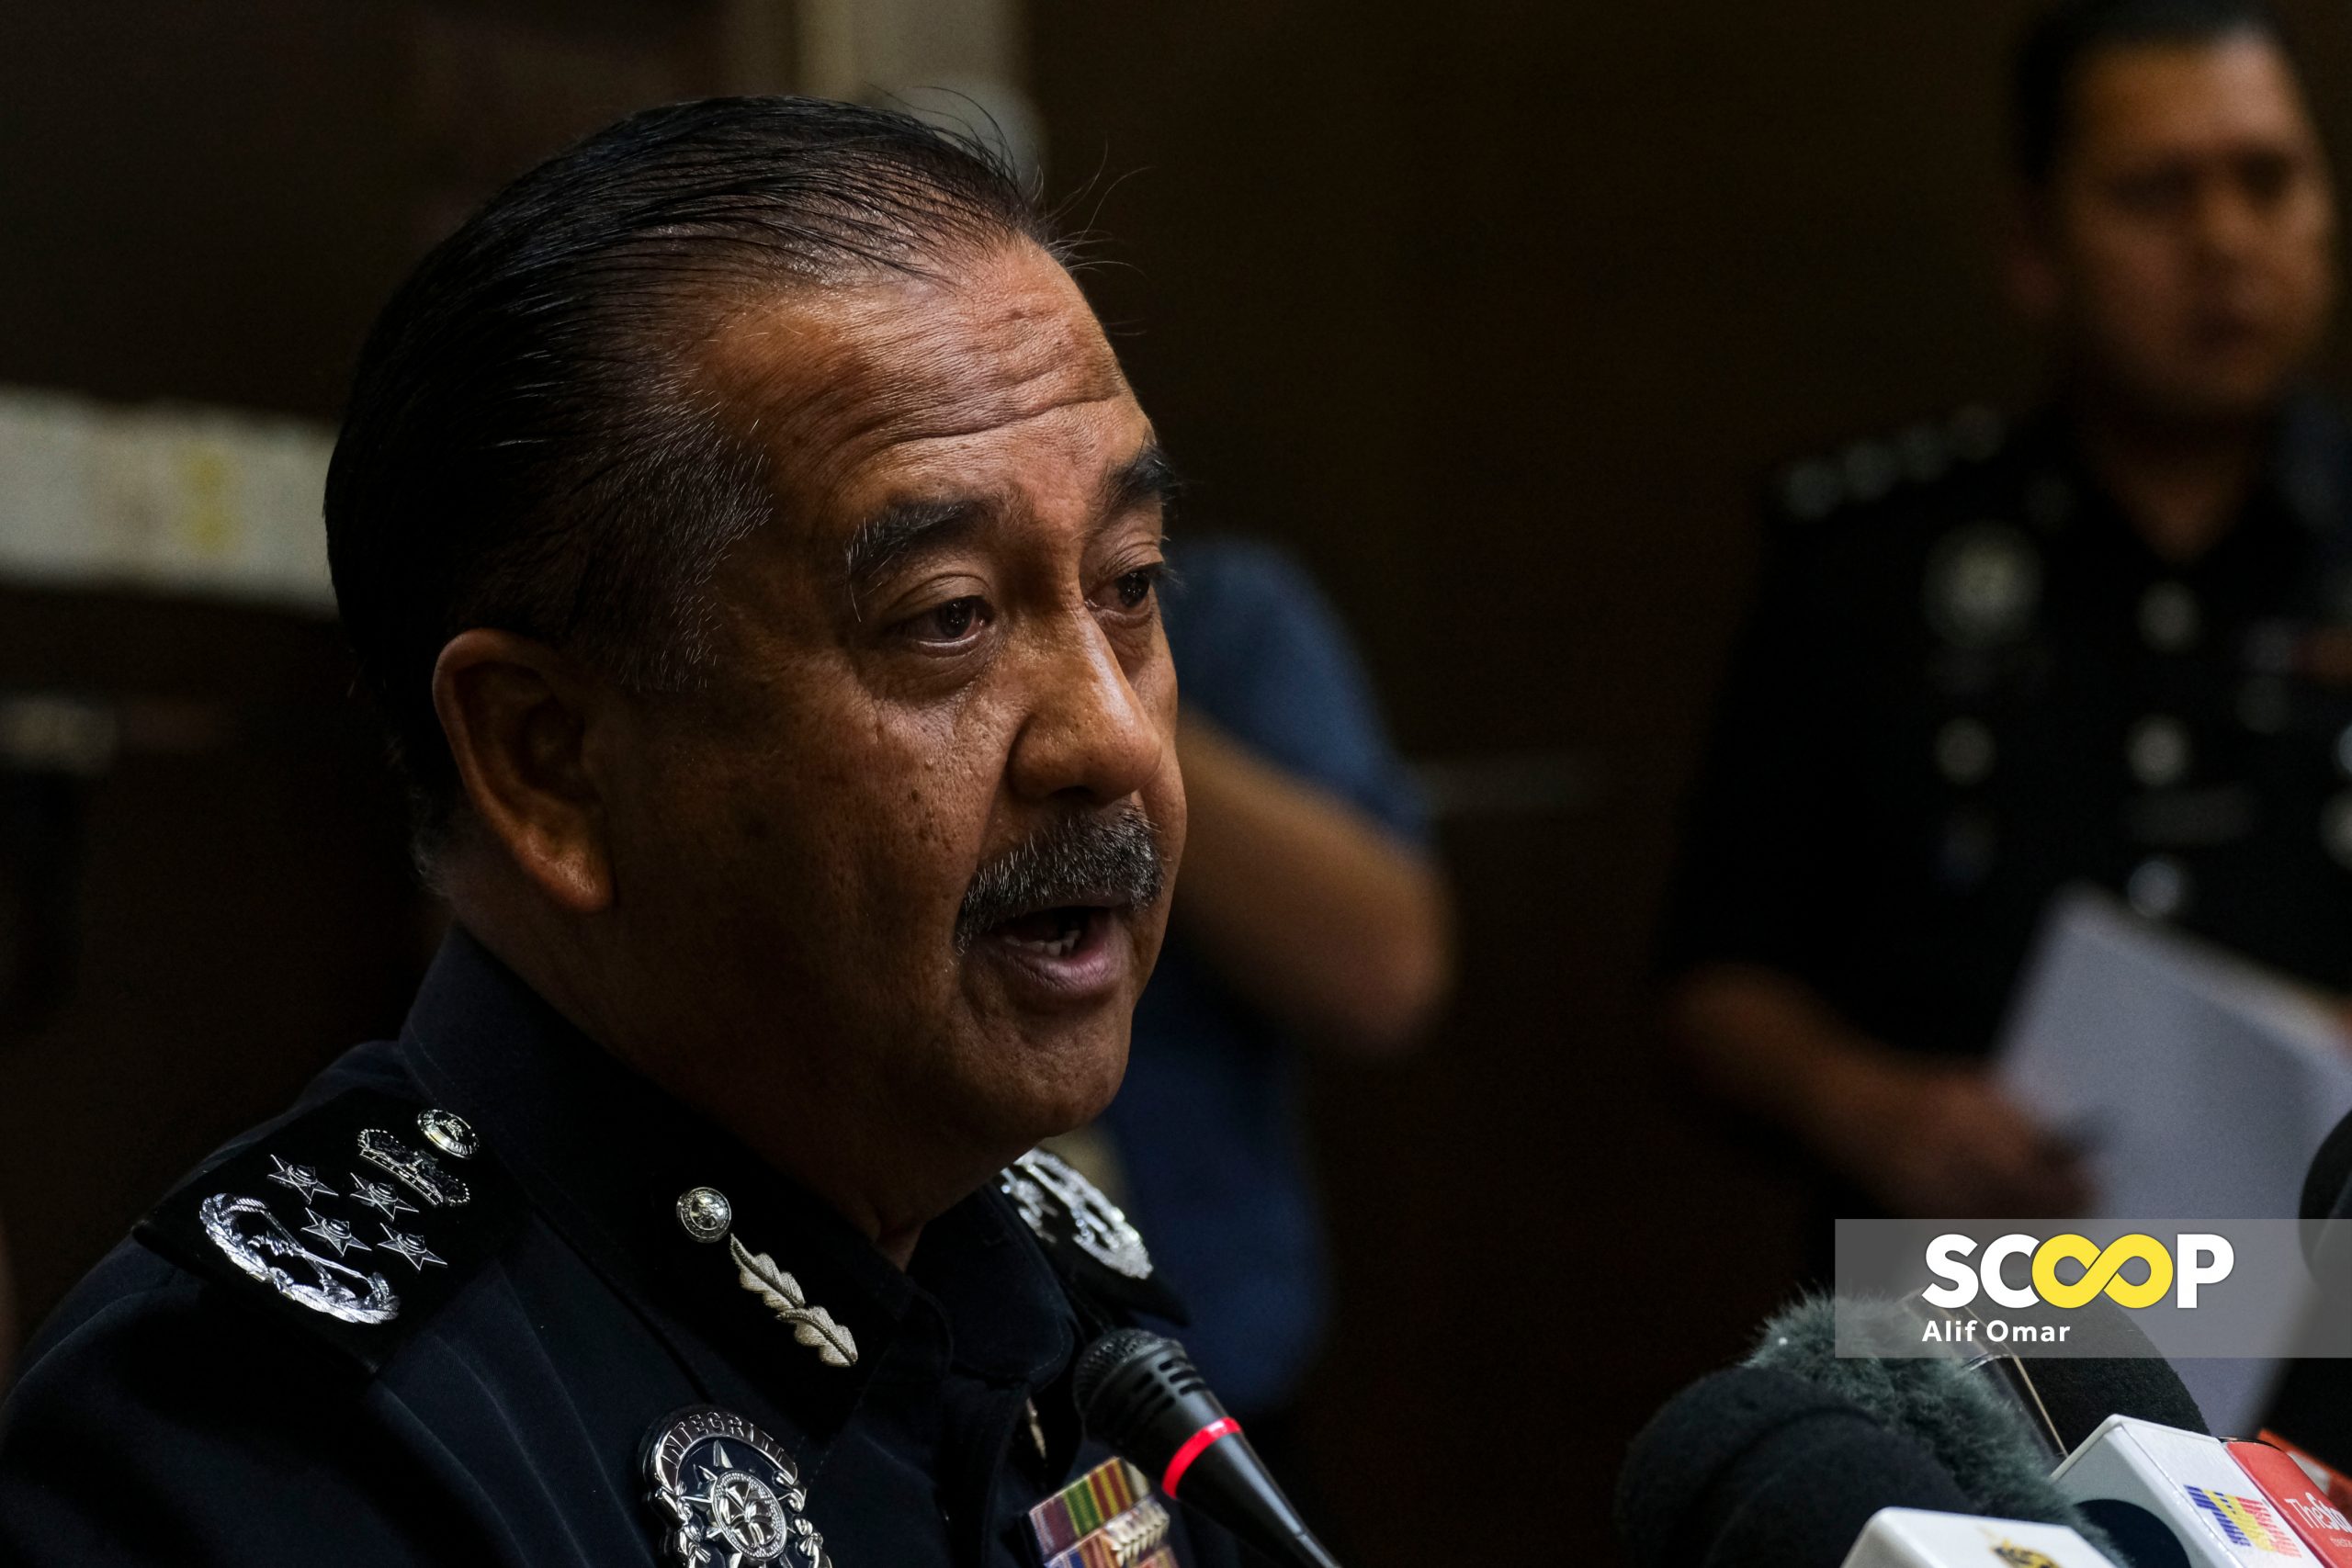 IGP says national security under control, no threat reports on Palestine issue